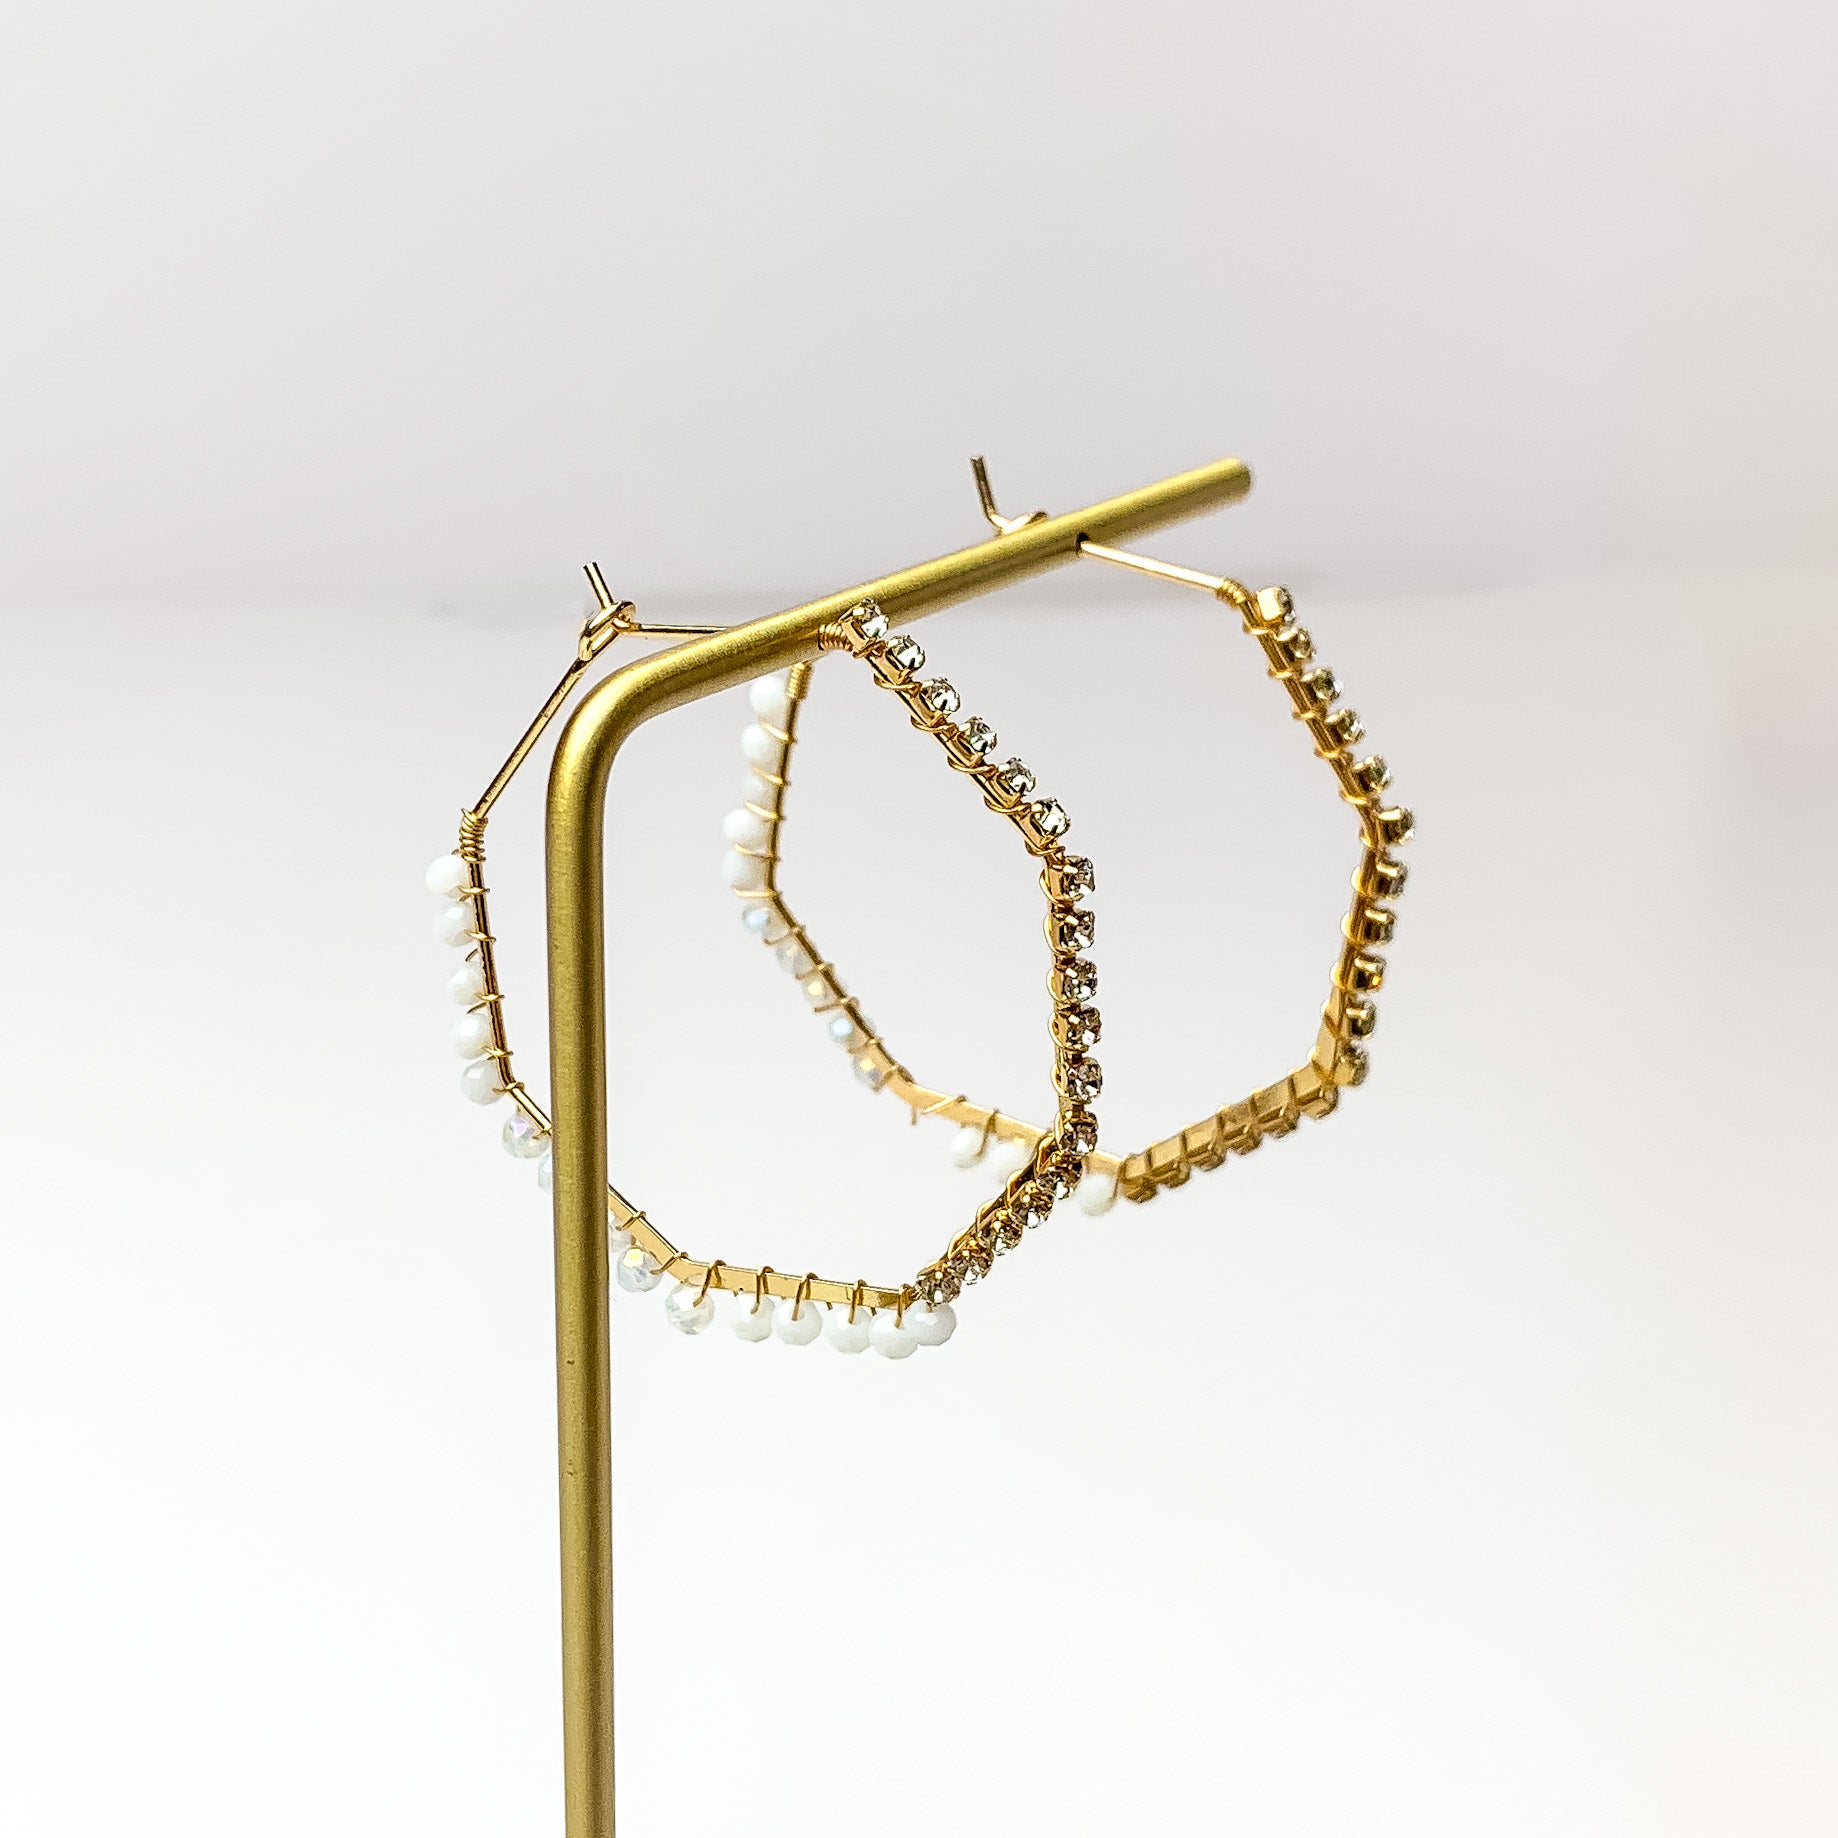 Small Gold Tone Hoop Earrings Outlined in Pearls. Pictured on a white background with the earrings on a gold stand.